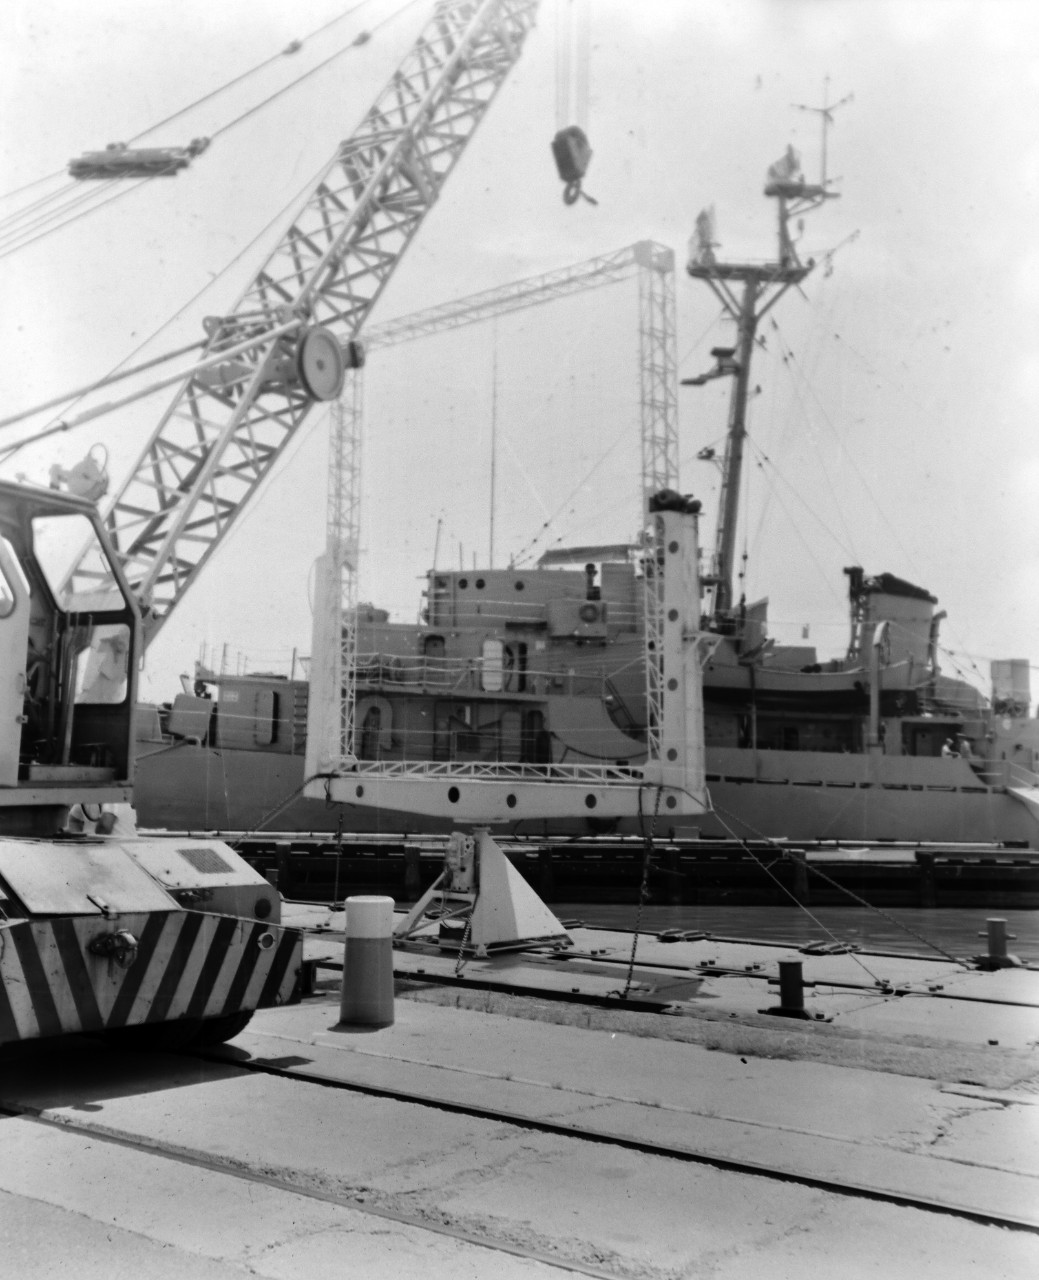 NMUSN-1010:   XAF Radar Antenna, 1960s.   Being delivered to the Washington Navy Yard for display.  Note the U.S. Navy tug alongside a small thin barge carrying the radar antenna.  This radar was the first shipboard radar to be installed onboard a U.S. Navy ship, USS New York (BB-34).  Surviving World War II, it was brought to the Washington Navy Yard where it was on exterior display until the mid-1980s where it was placed into storage.   Following conservation, the radar is now on display at the National Electronics Museum, Linthicum, Maryland.    Original is a black and white negative.   National Museum of the U.S. Navy Photograph Collection.